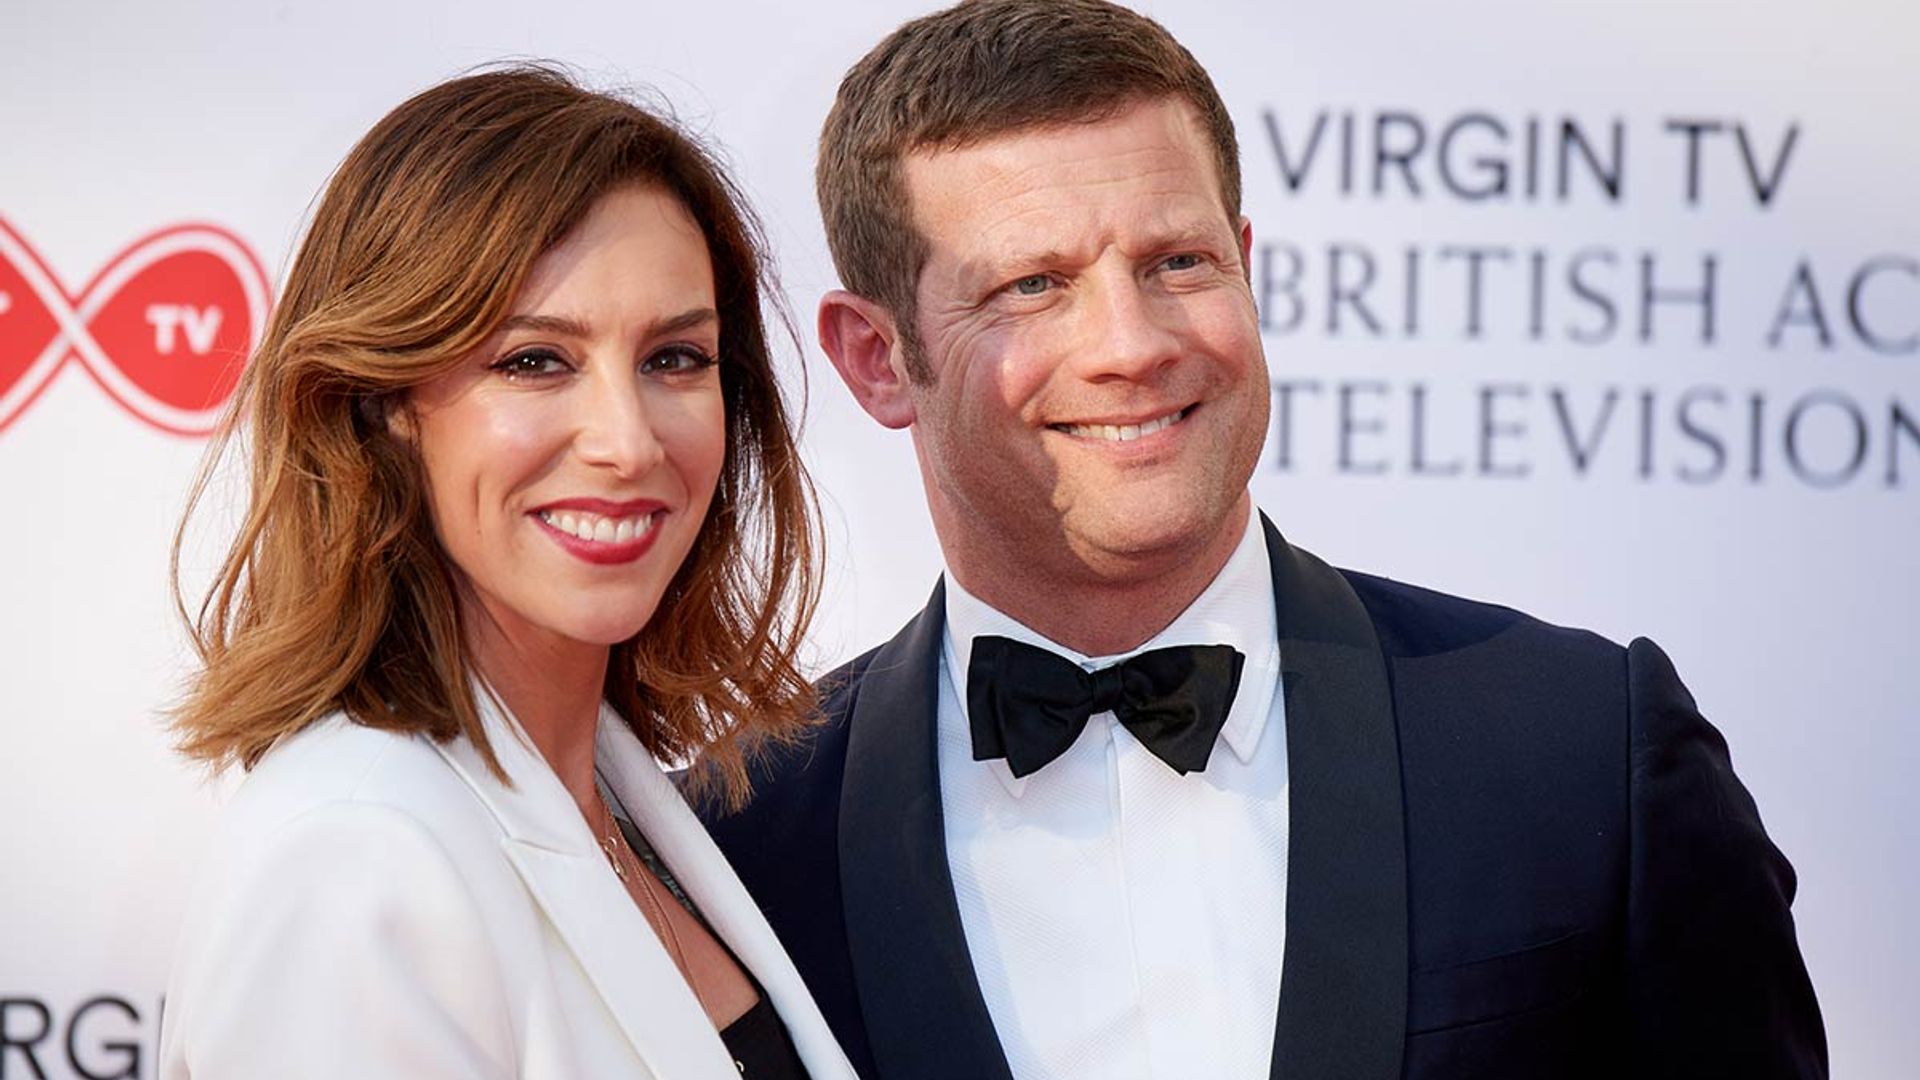 Dermot O'Leary Net Worth, Lifestyle, Biography, Wiki, Family And More